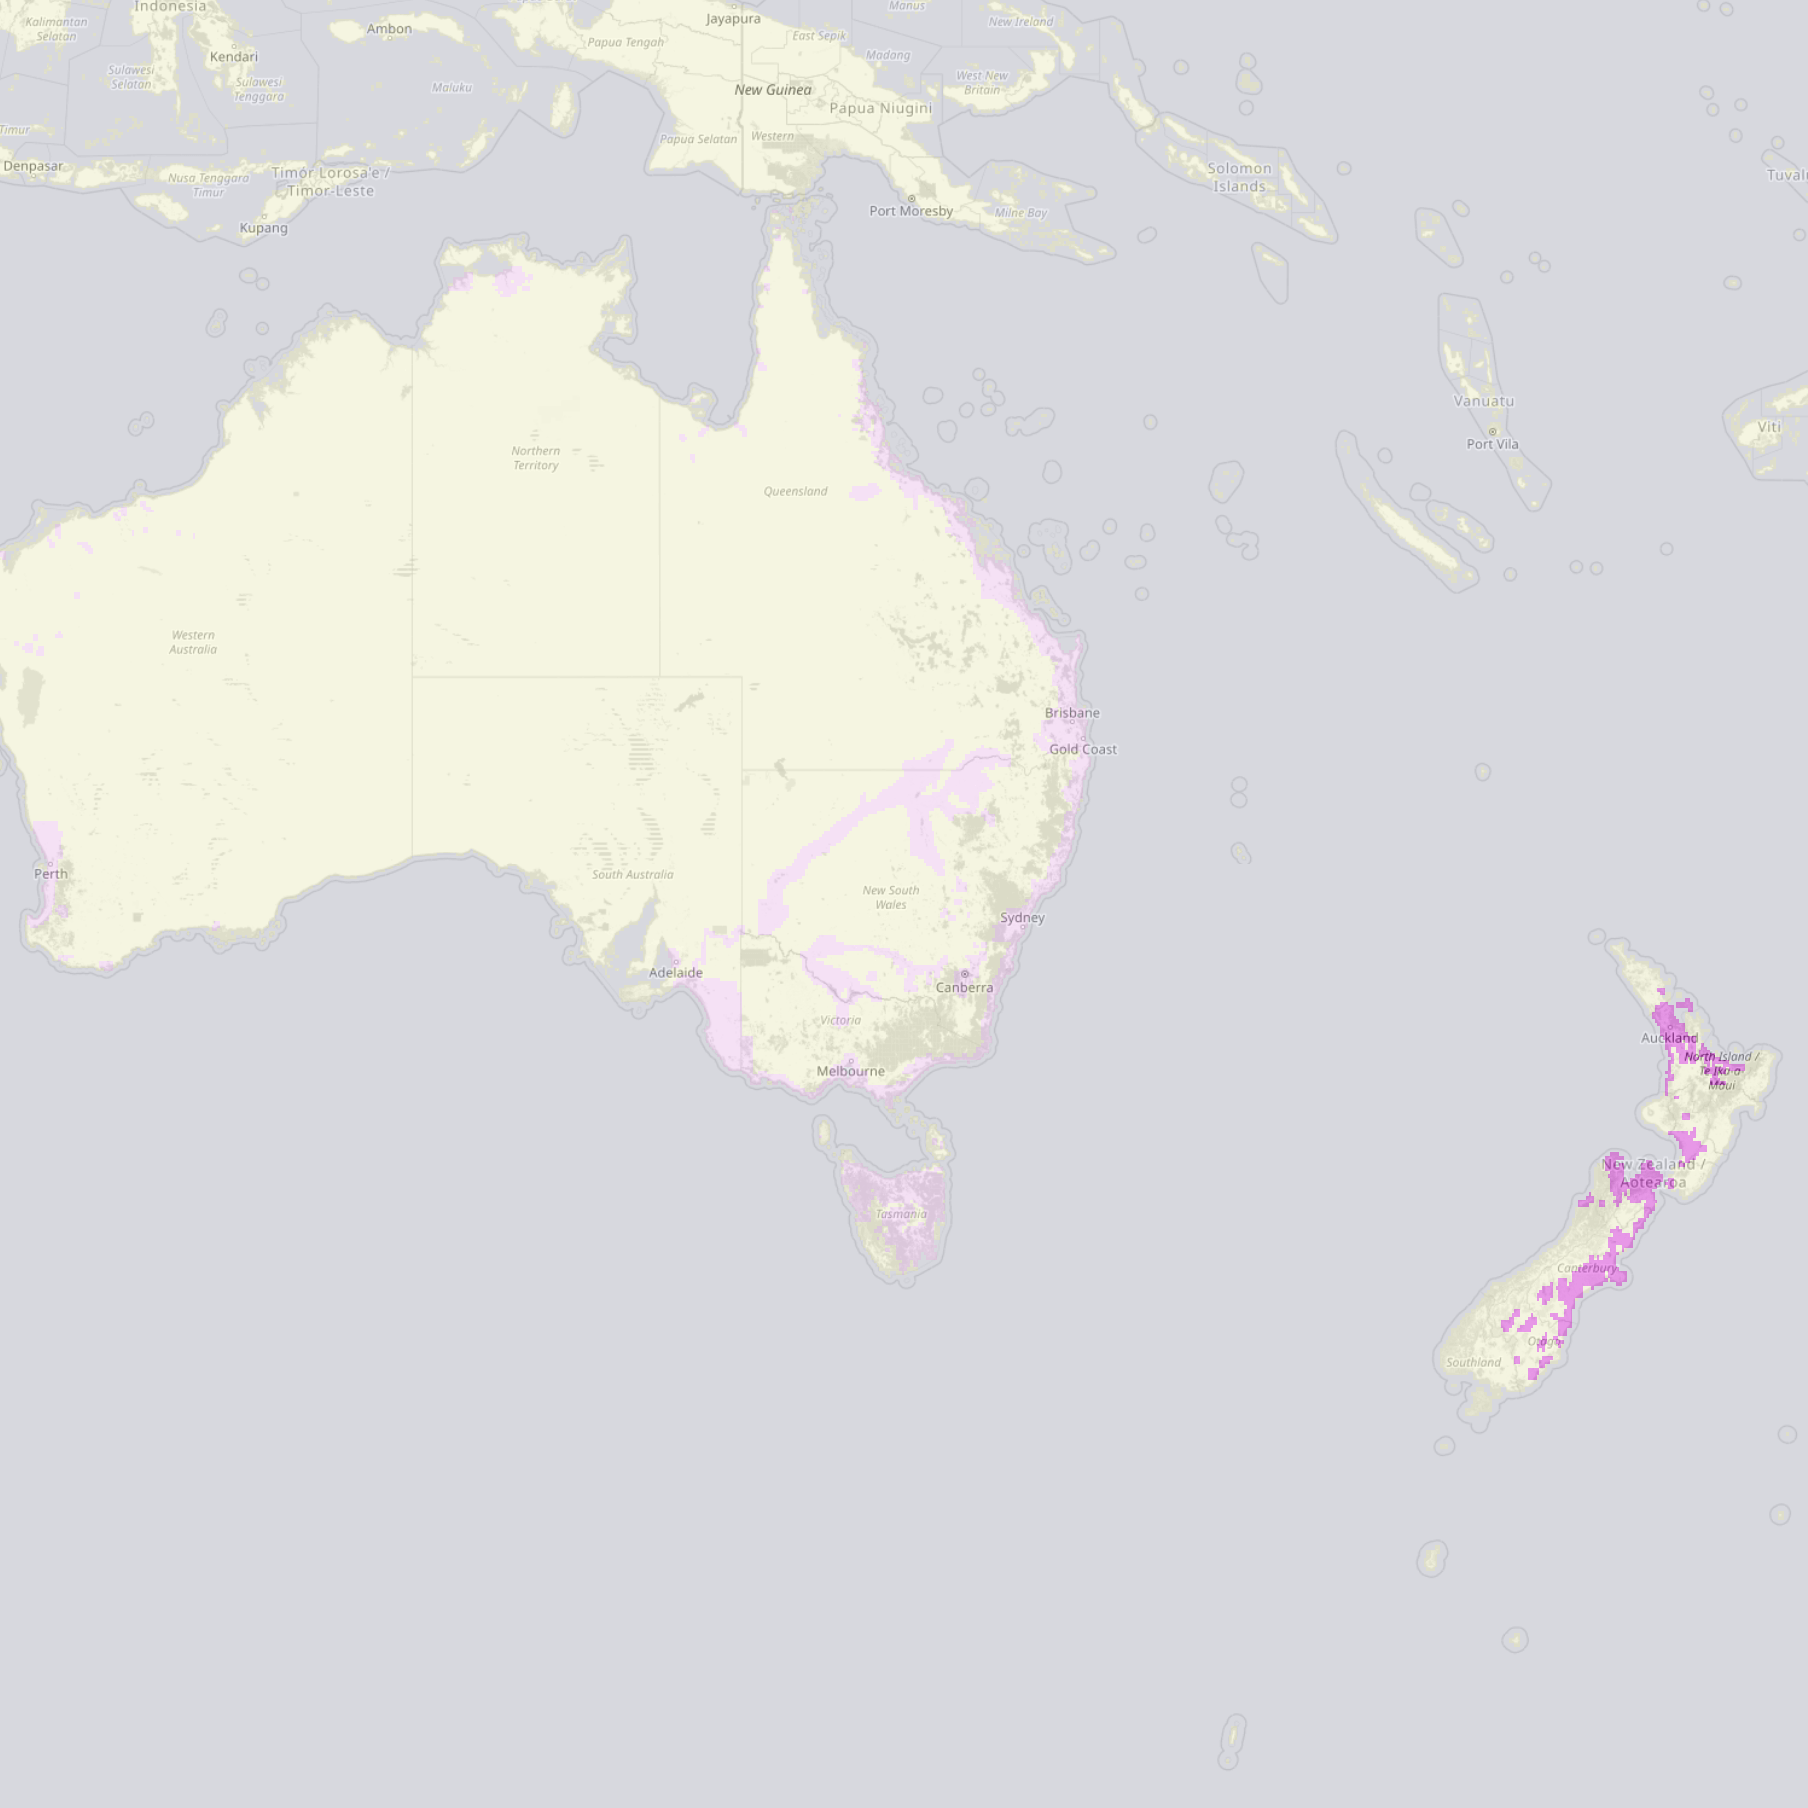 Global coverage map.